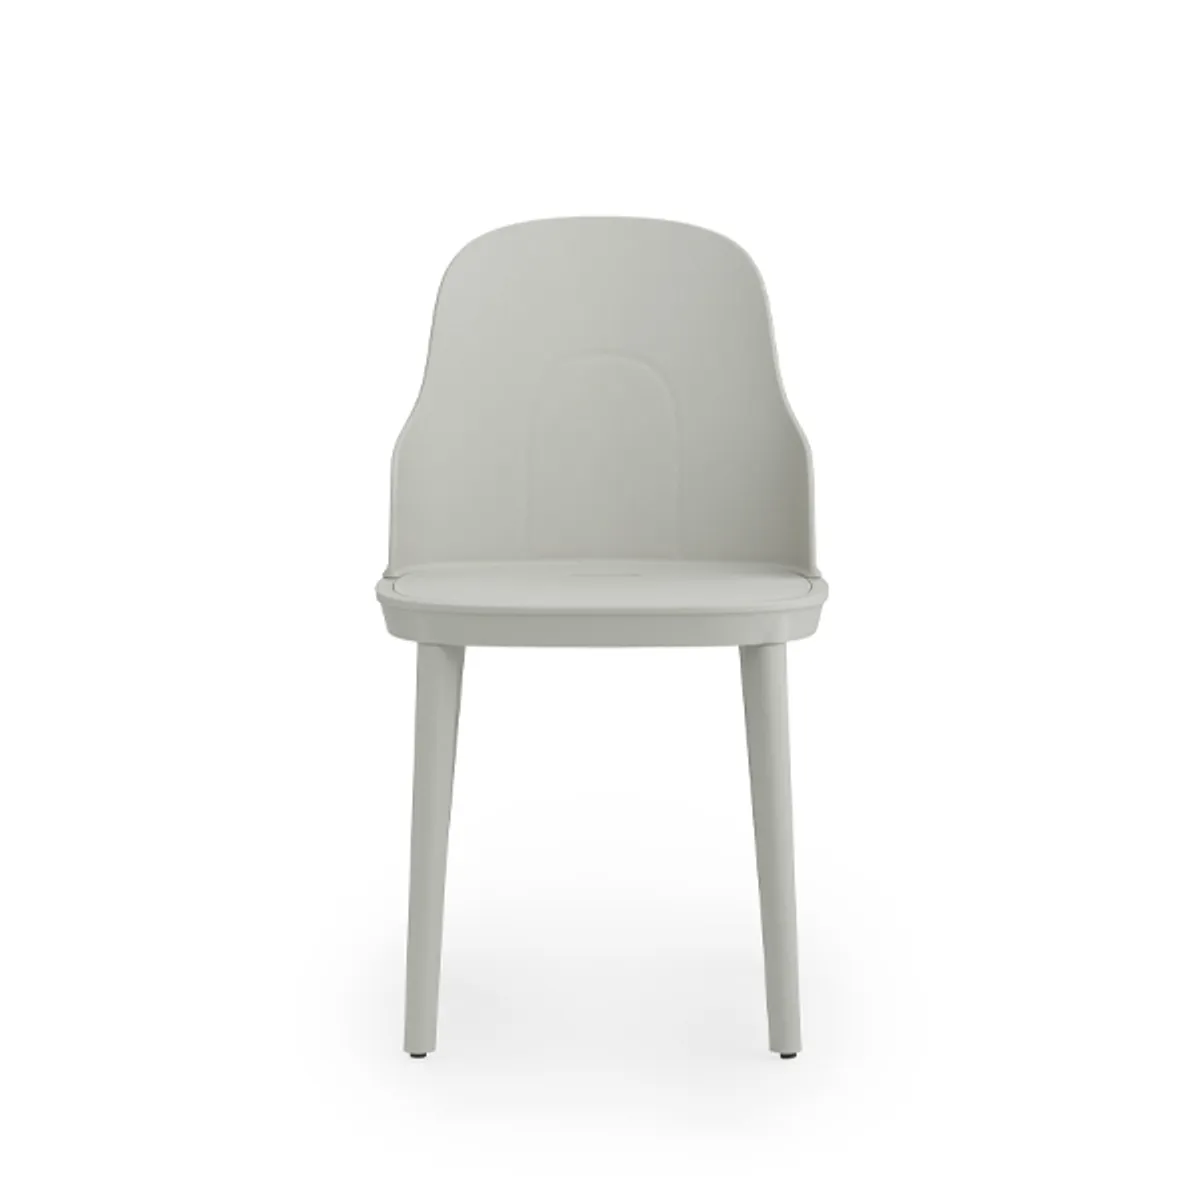 Bon poly chair Inside Out Contracts2